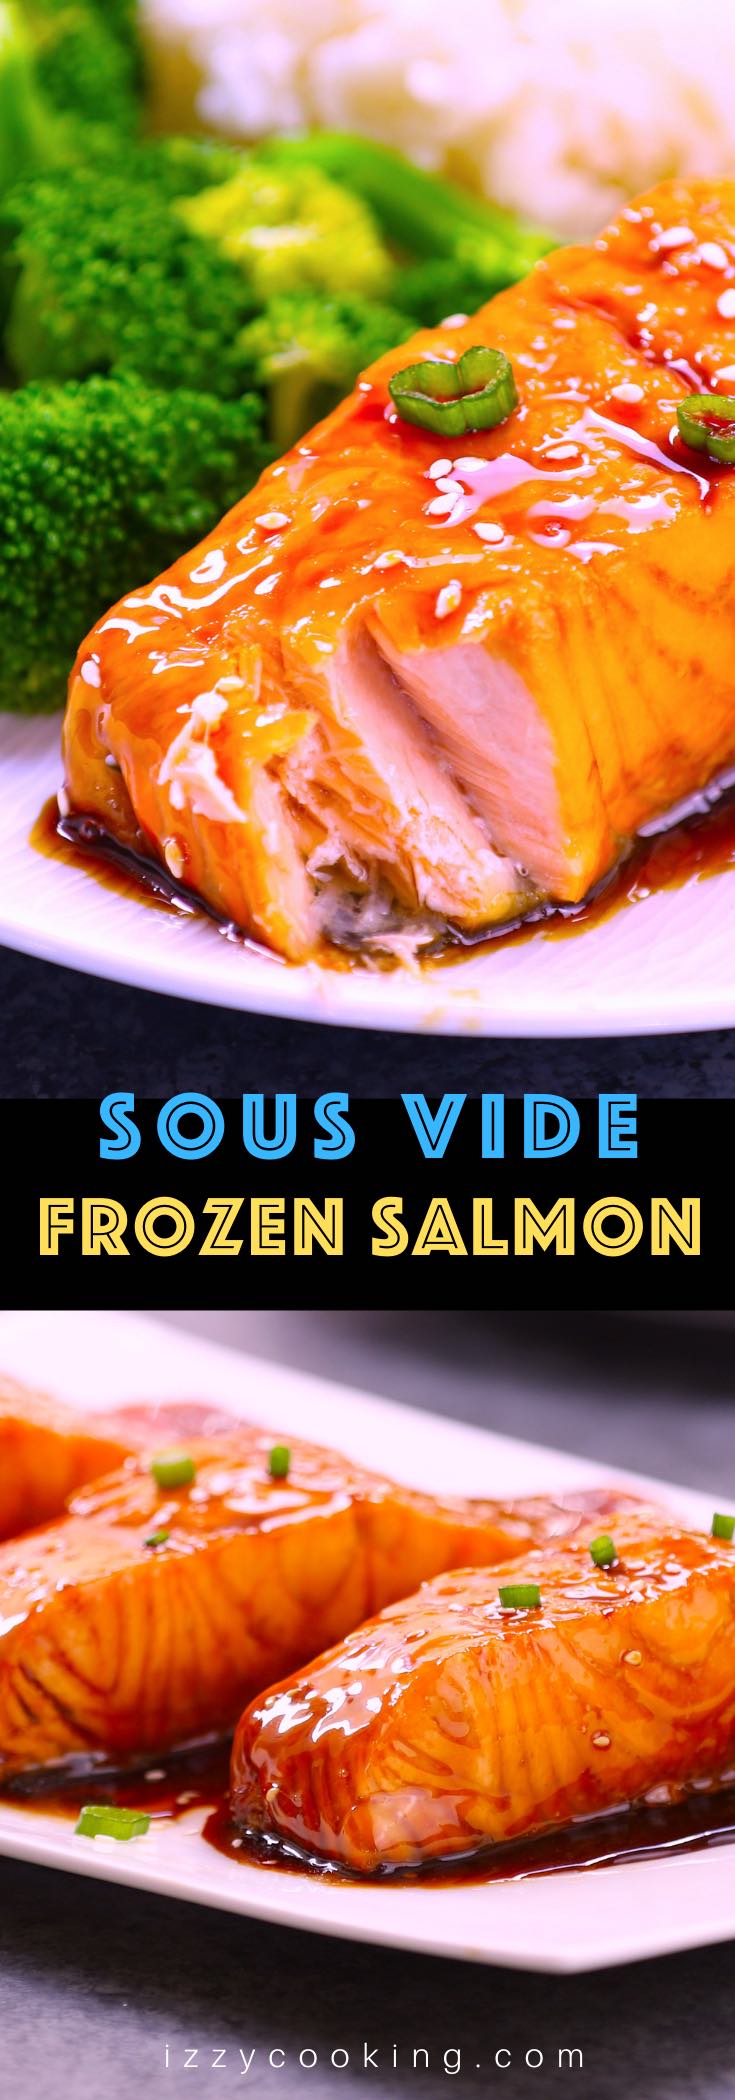 Sous Vide Frozen Salmon is absolutely the BEST way to cook frozen salmon fillets! It’s easy, convenient, and tastes as delicious as properly thawed and cooked salmon. Sous vide is your secret weapon! It comes out perfect every time, and I never take the time to thaw salmon again after I discovered this method. #SousVideSalmon #SousVideSalmonFromFrozen